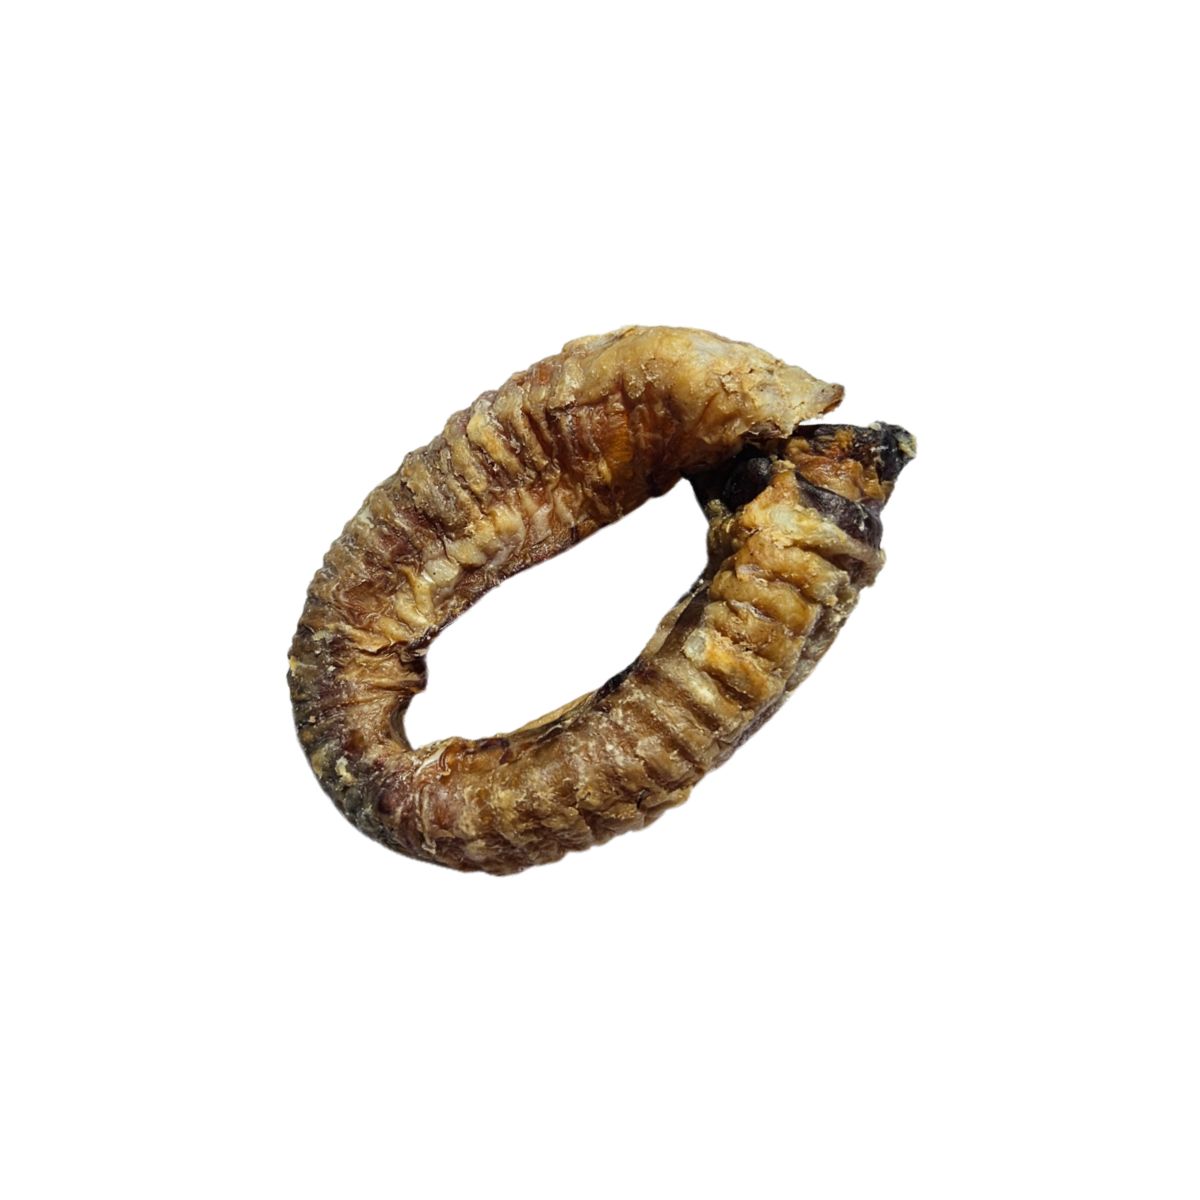 Lamb trachea ring - natural chews for dogs.